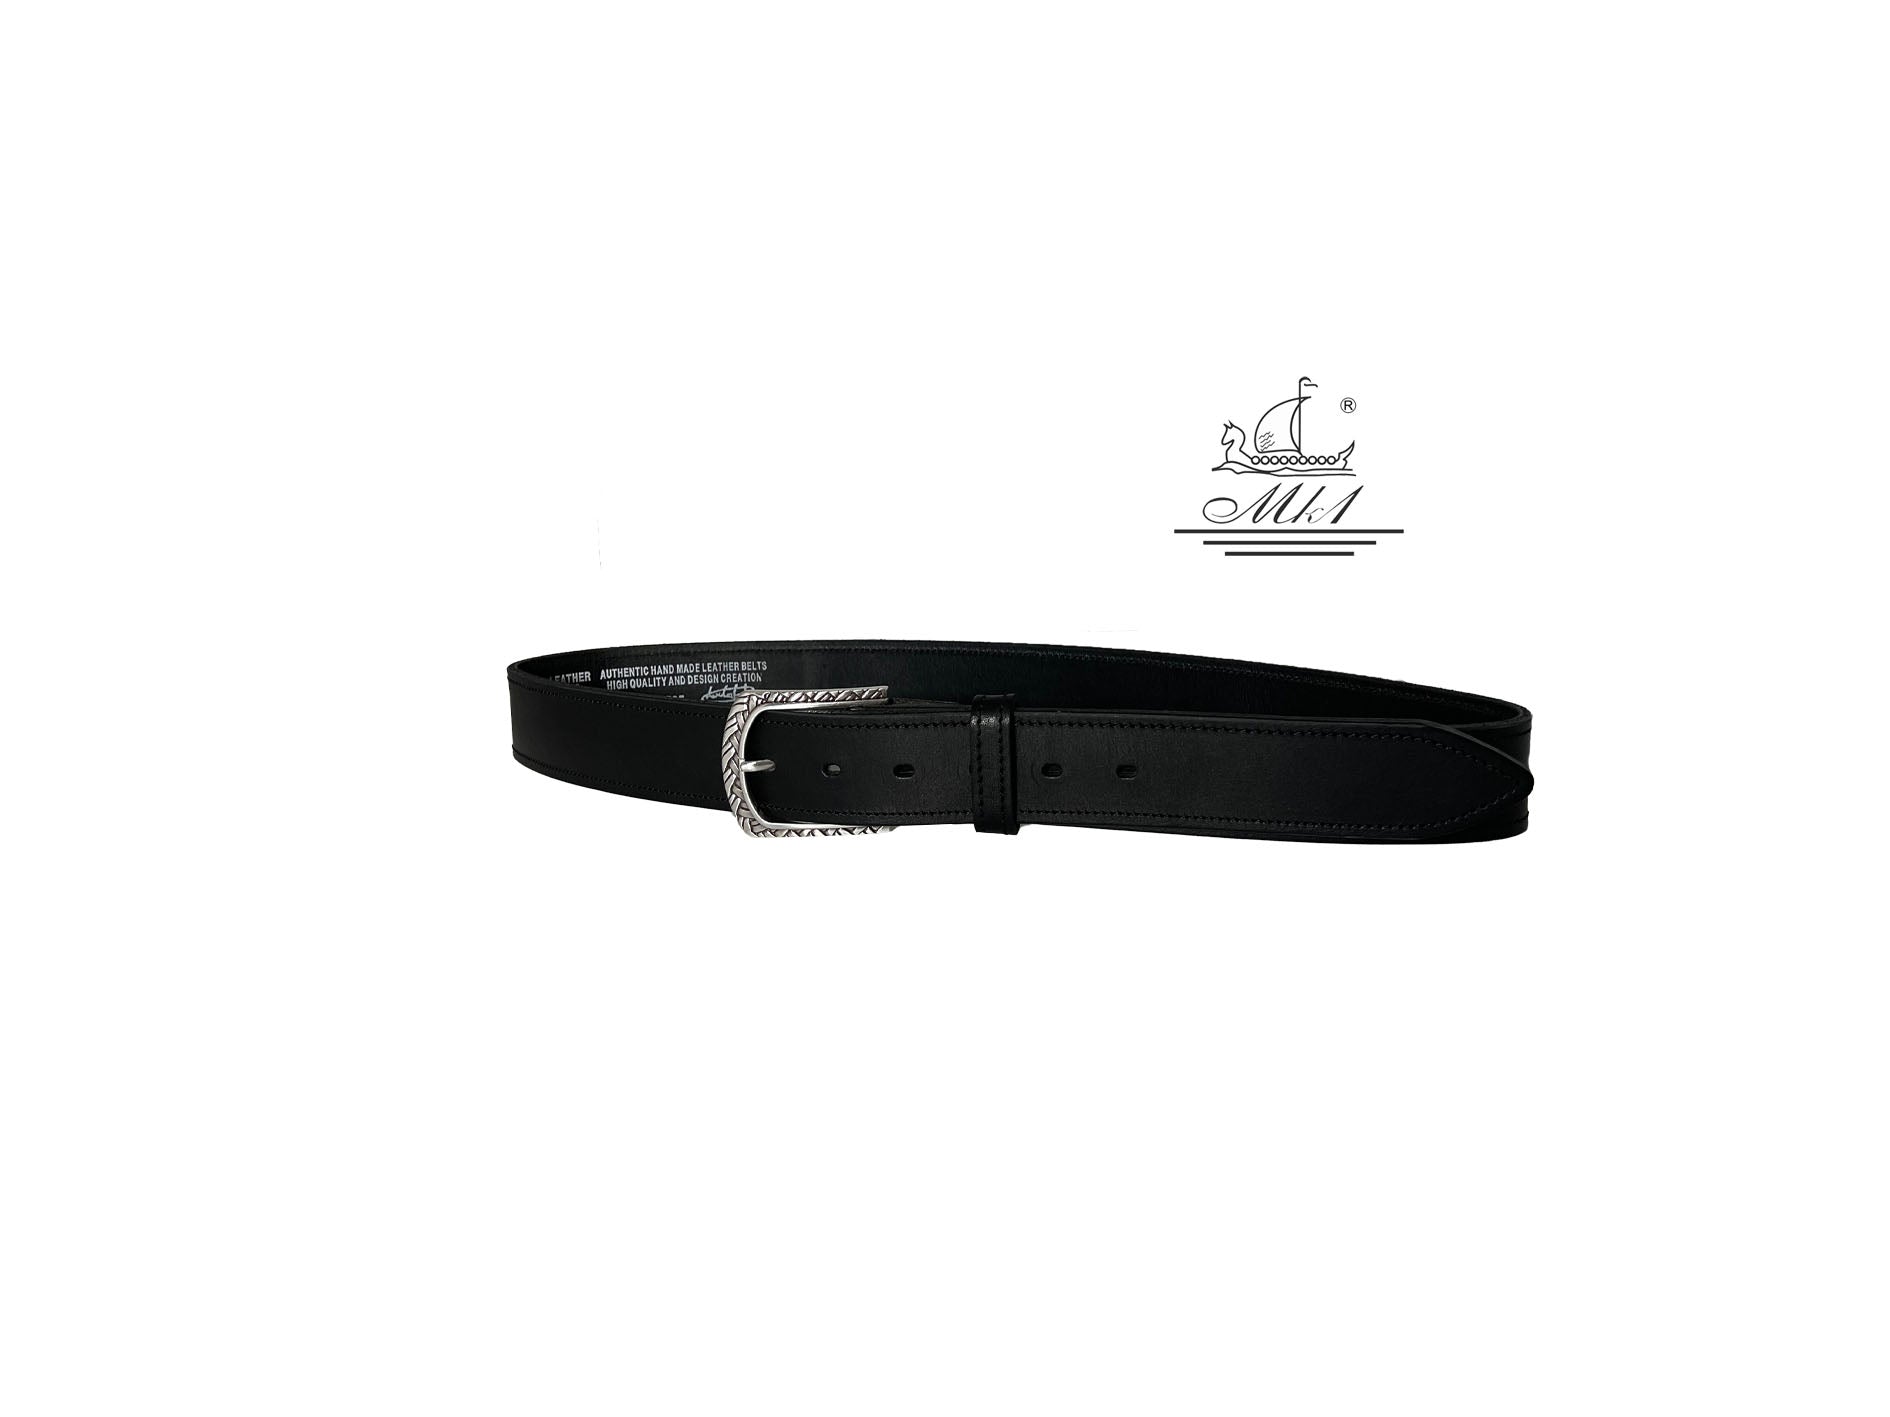 Unisex 4cm wide belt handcrafted from black leather with sticking design. 100/40B/DG